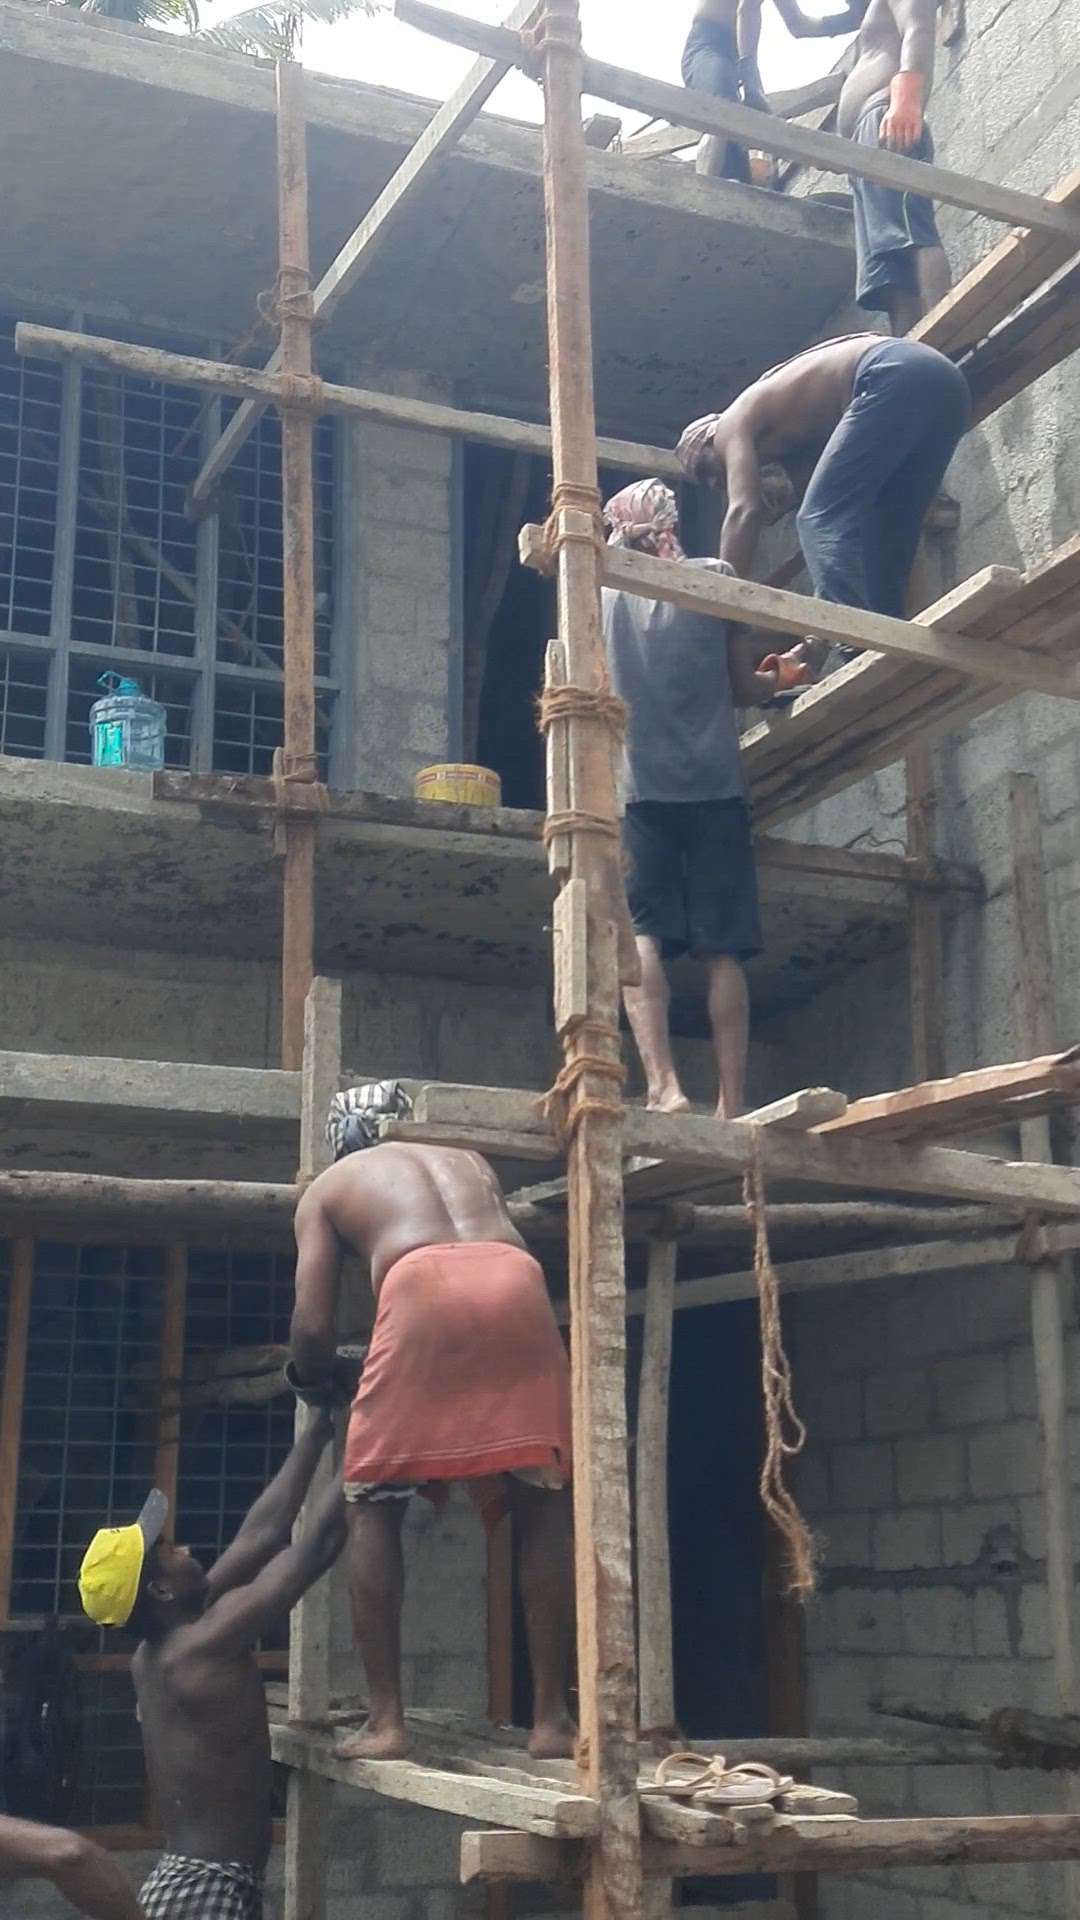 Lifting concrete to the heights